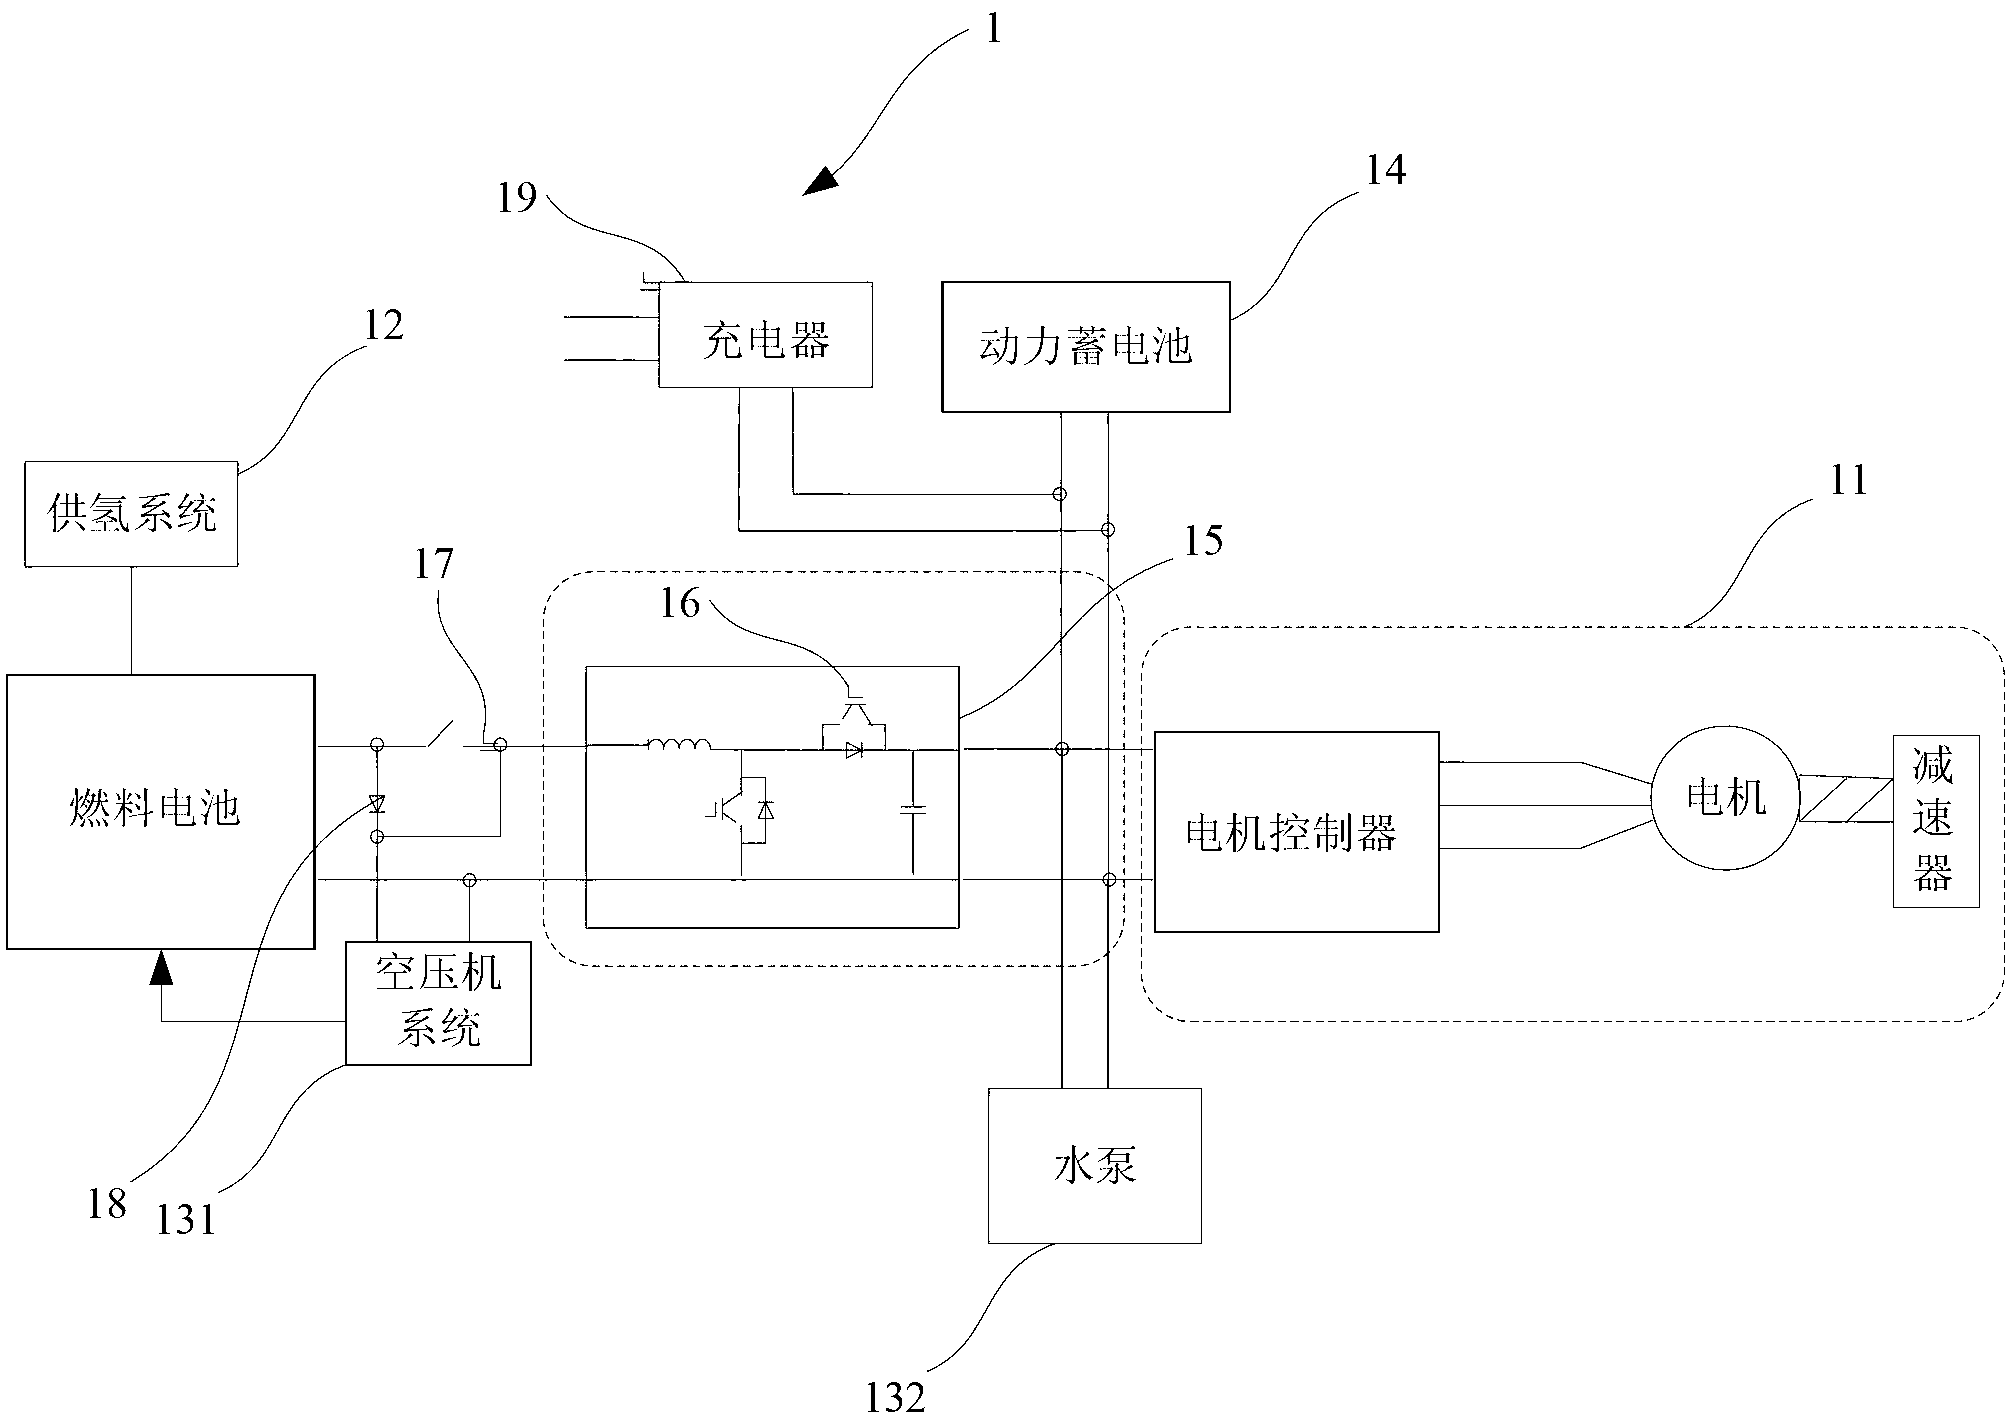 Power supply system of hybrid electric vehicle